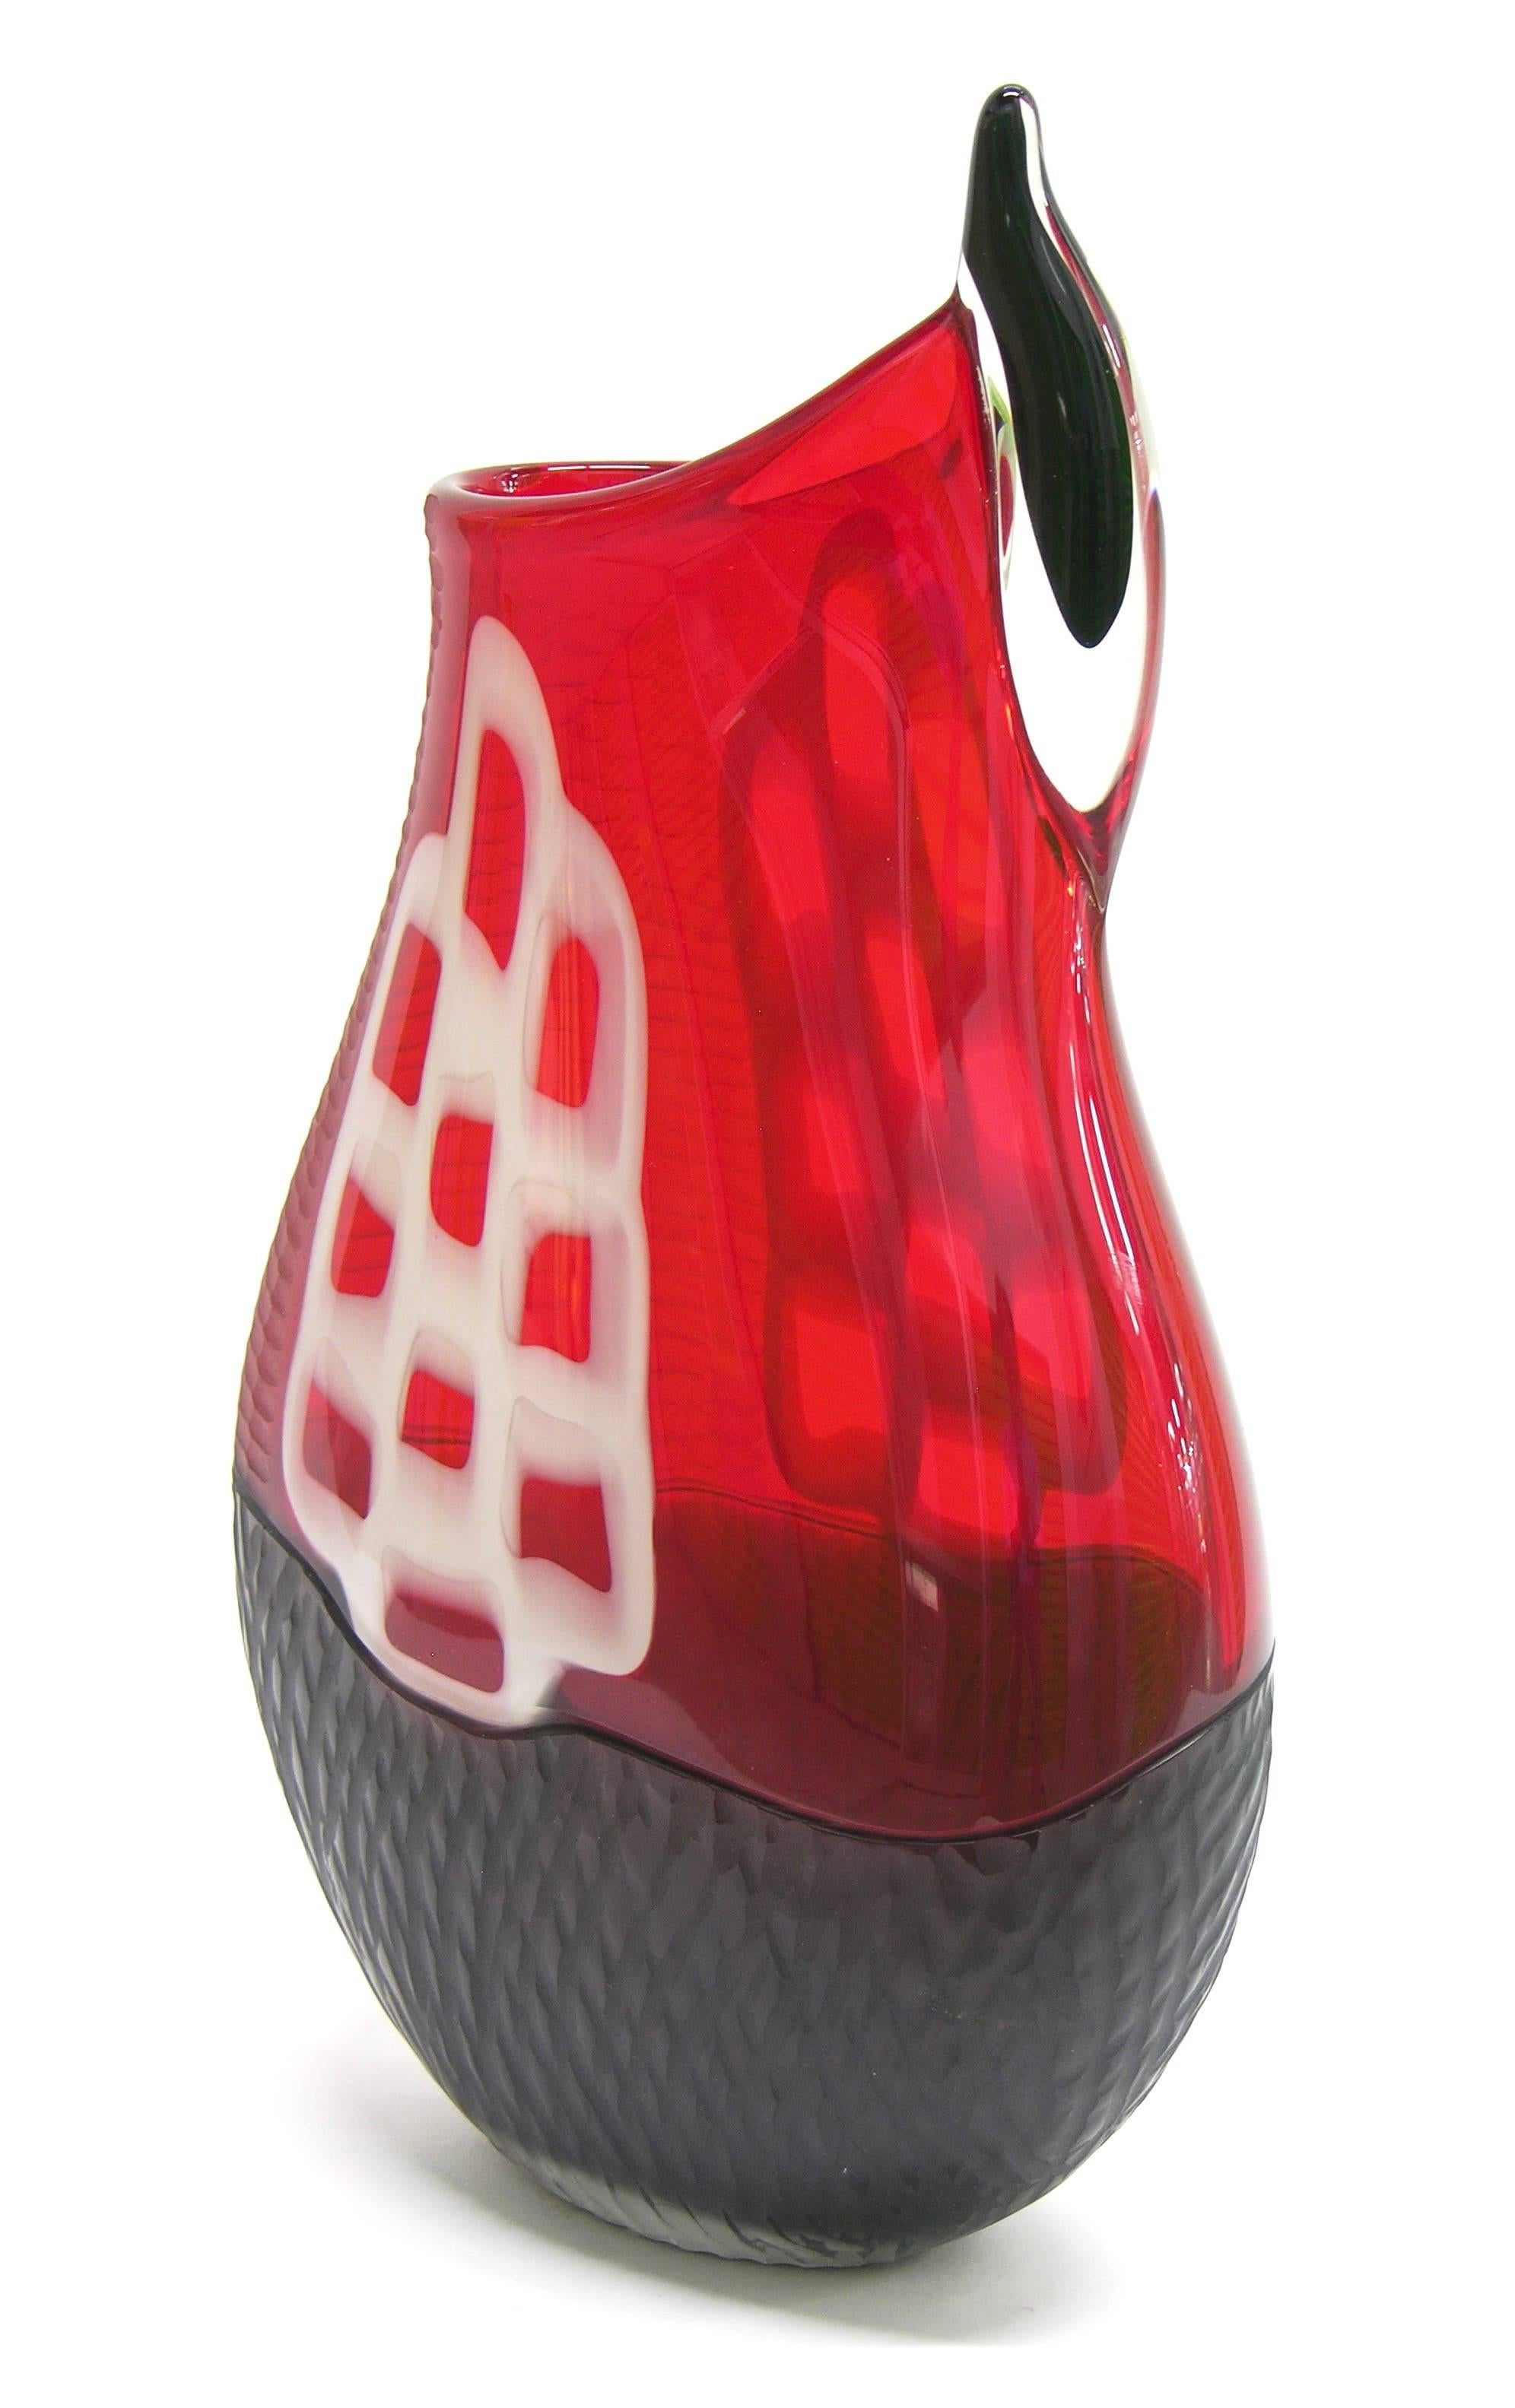 Alberto Dona 1980s Modern Sculpture Red Black White Engraved Murano Glass Vase In Excellent Condition For Sale In New York, NY